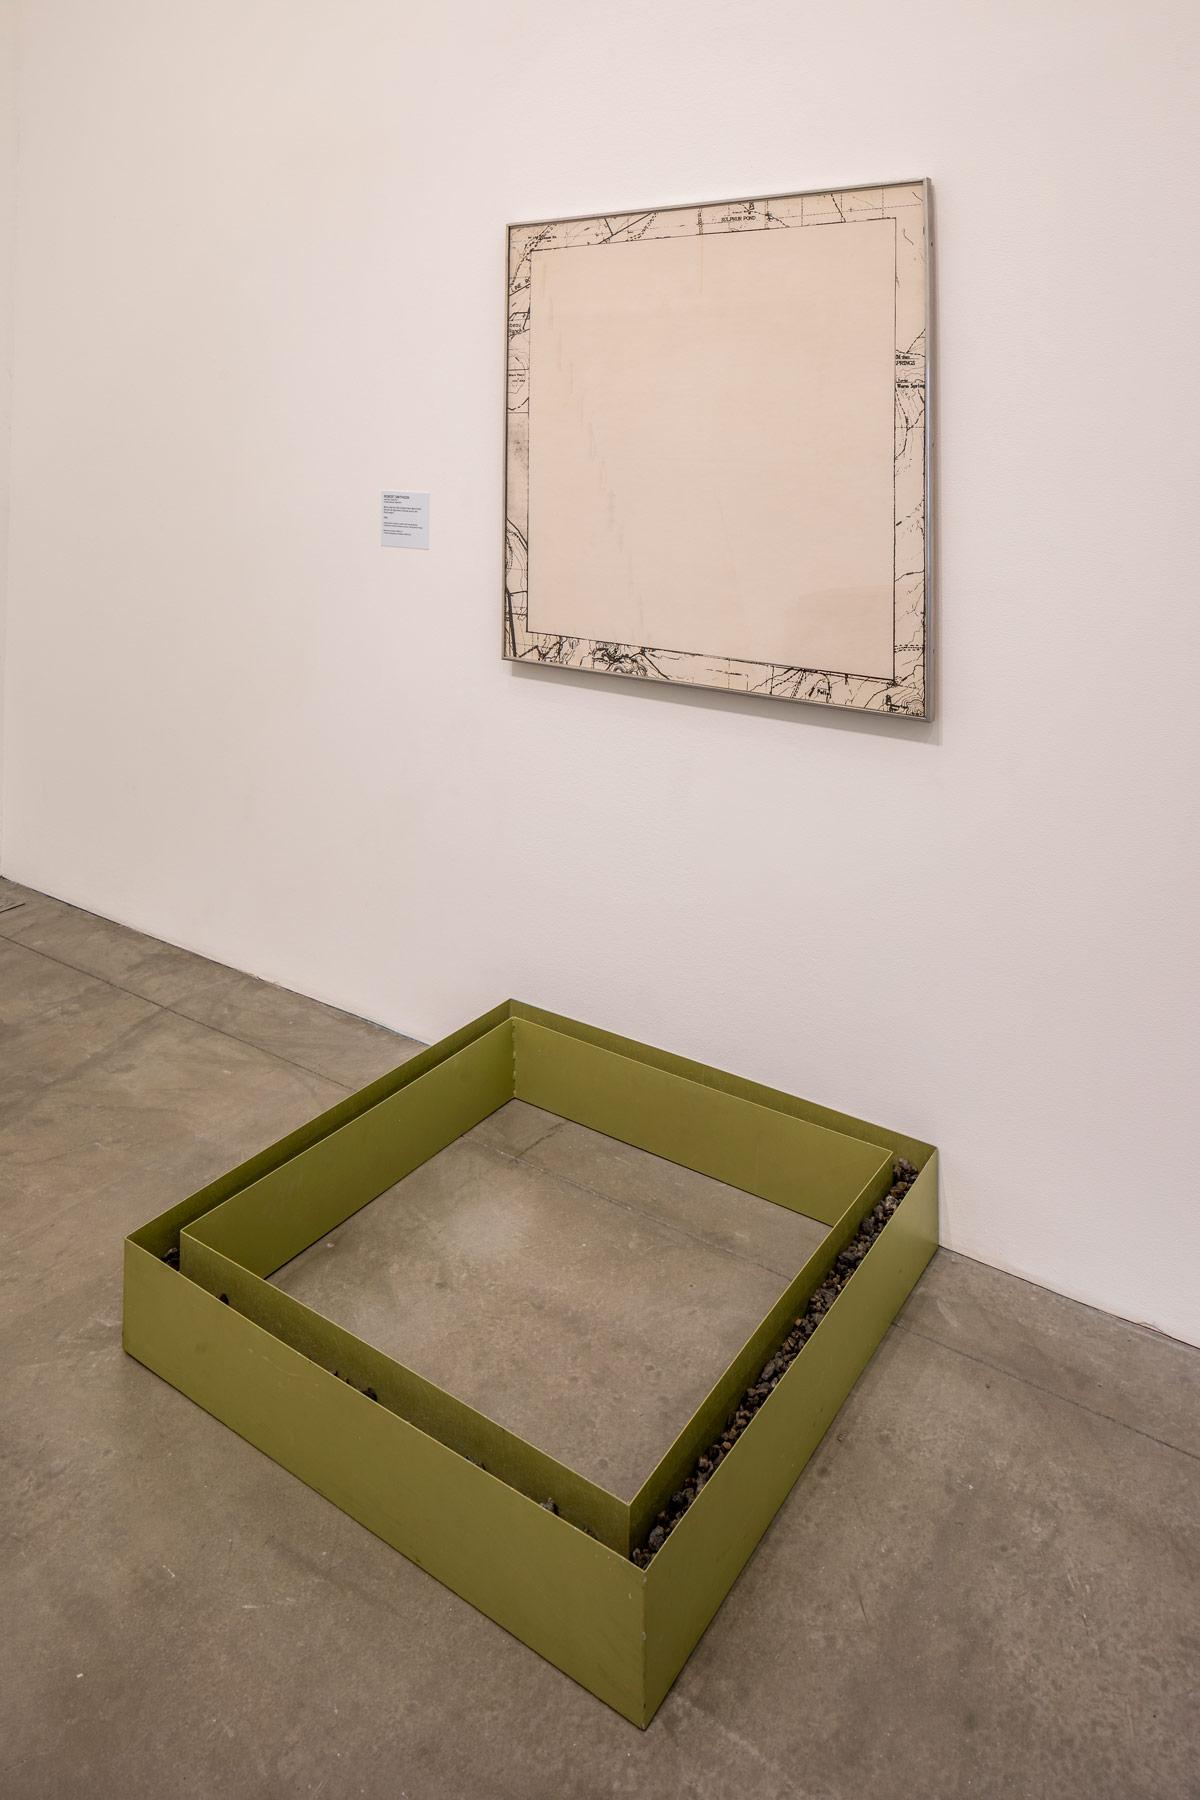 wall and floor with a square map on the wall and a square metal box of the same shape and size on the floor